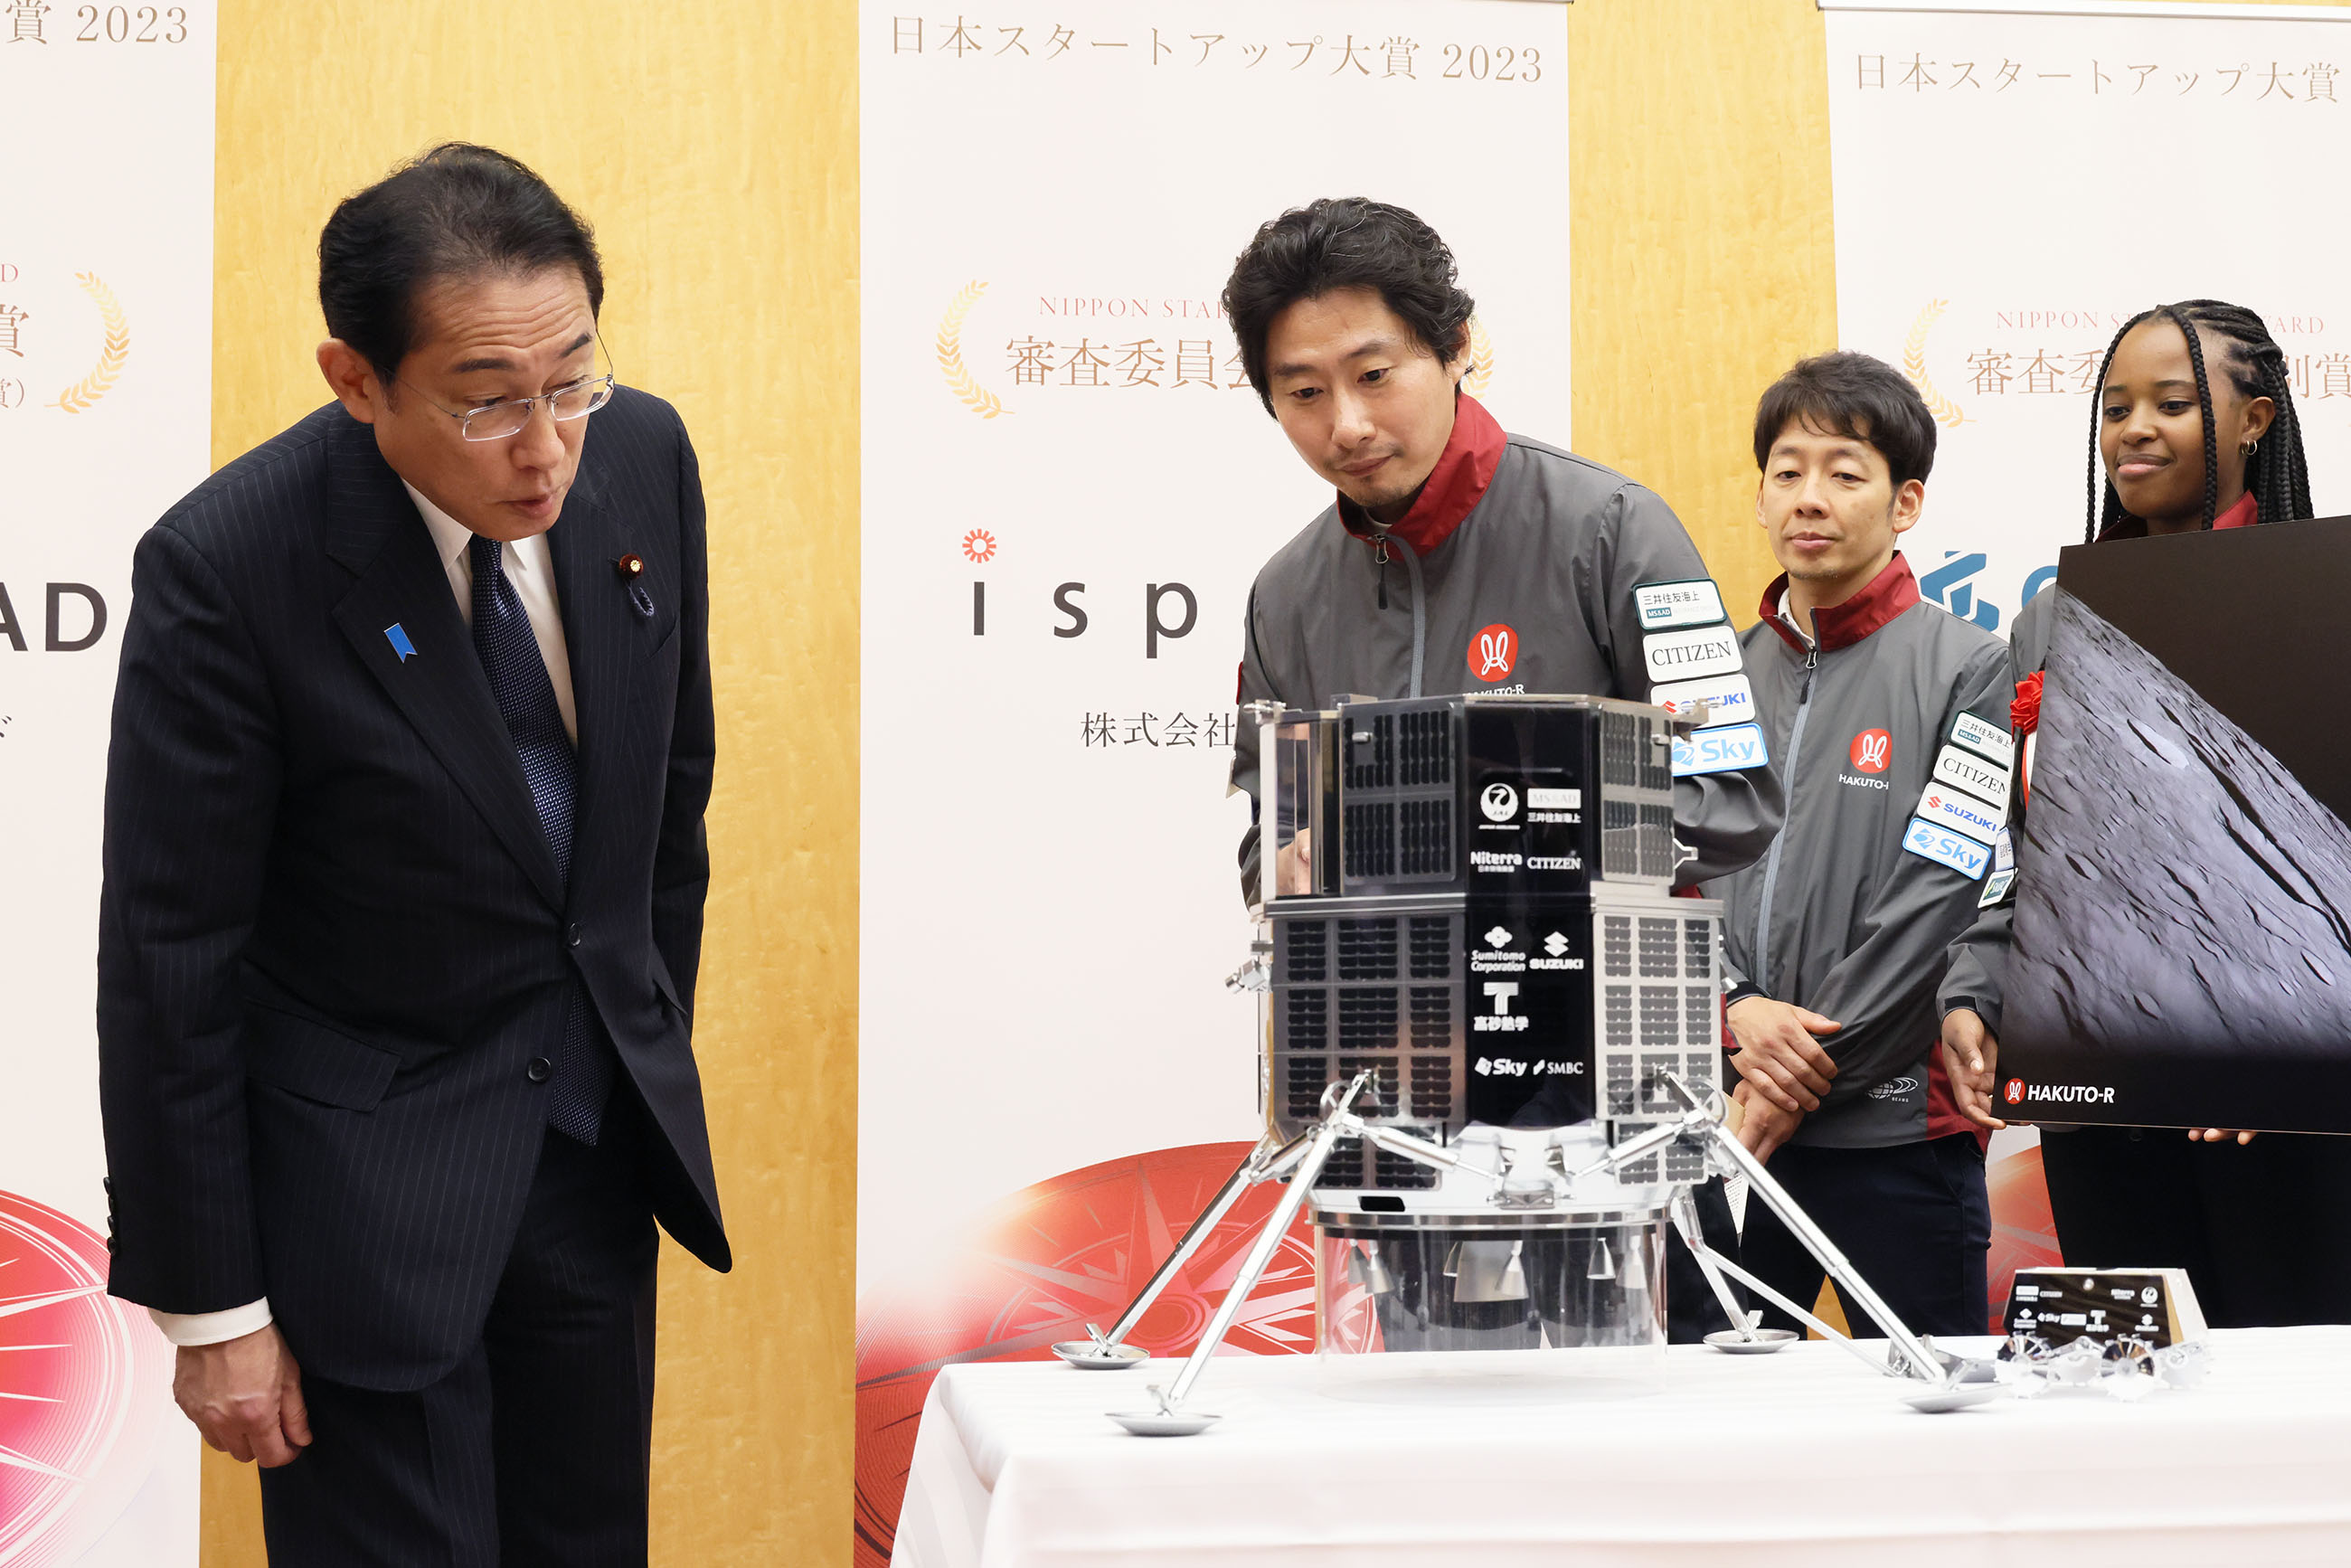 Prime Minister Kishida viewing the exhibition booth of award winners (8)